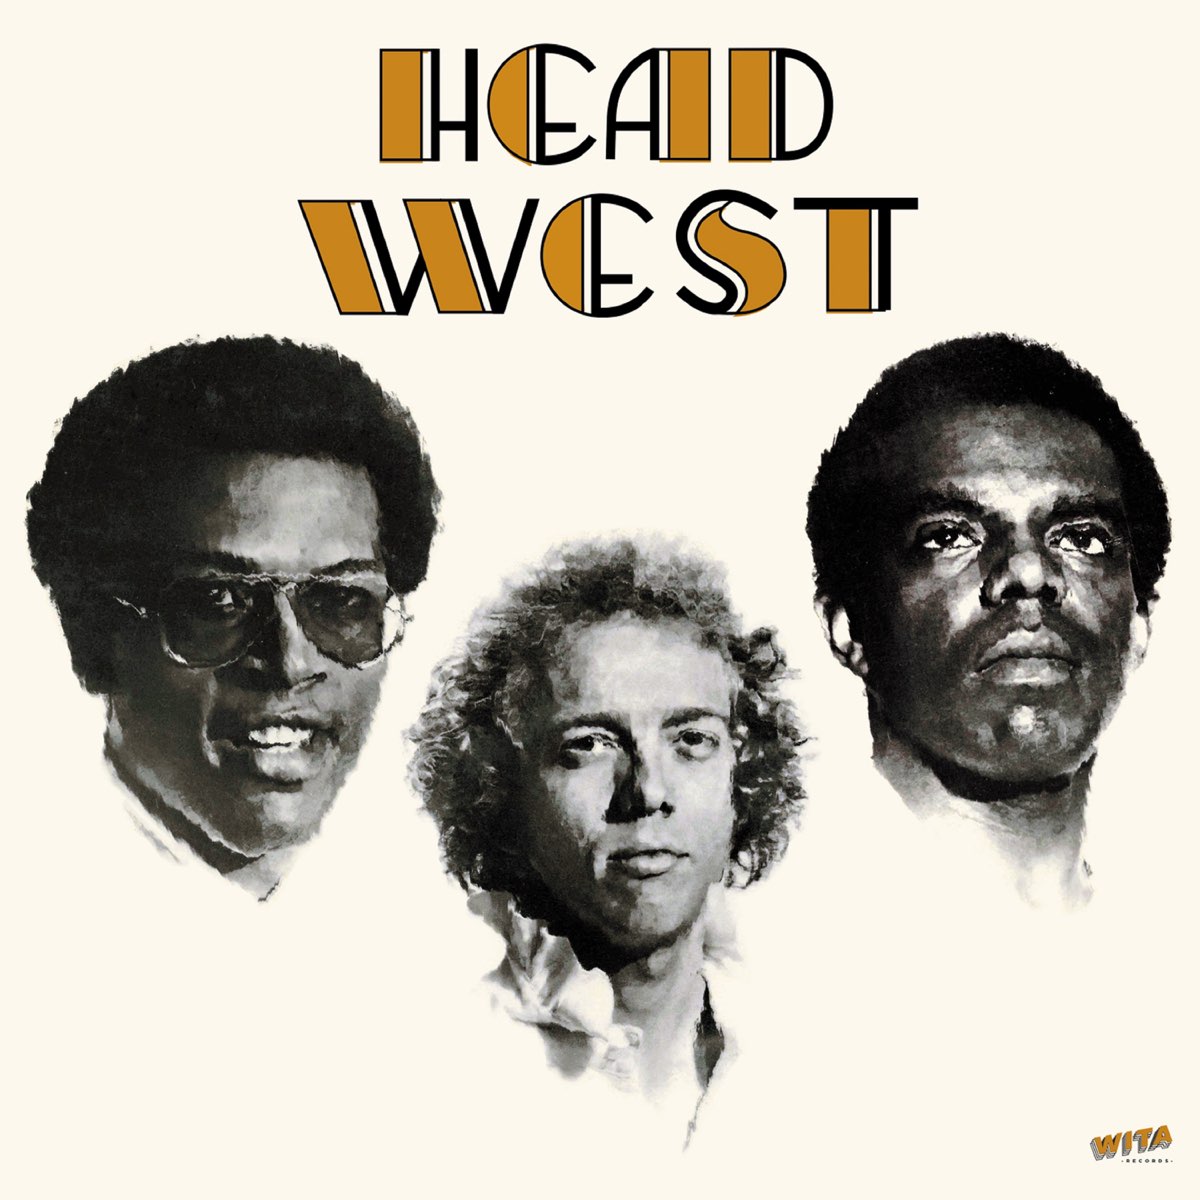 ‎Head West by Head West on Apple Music